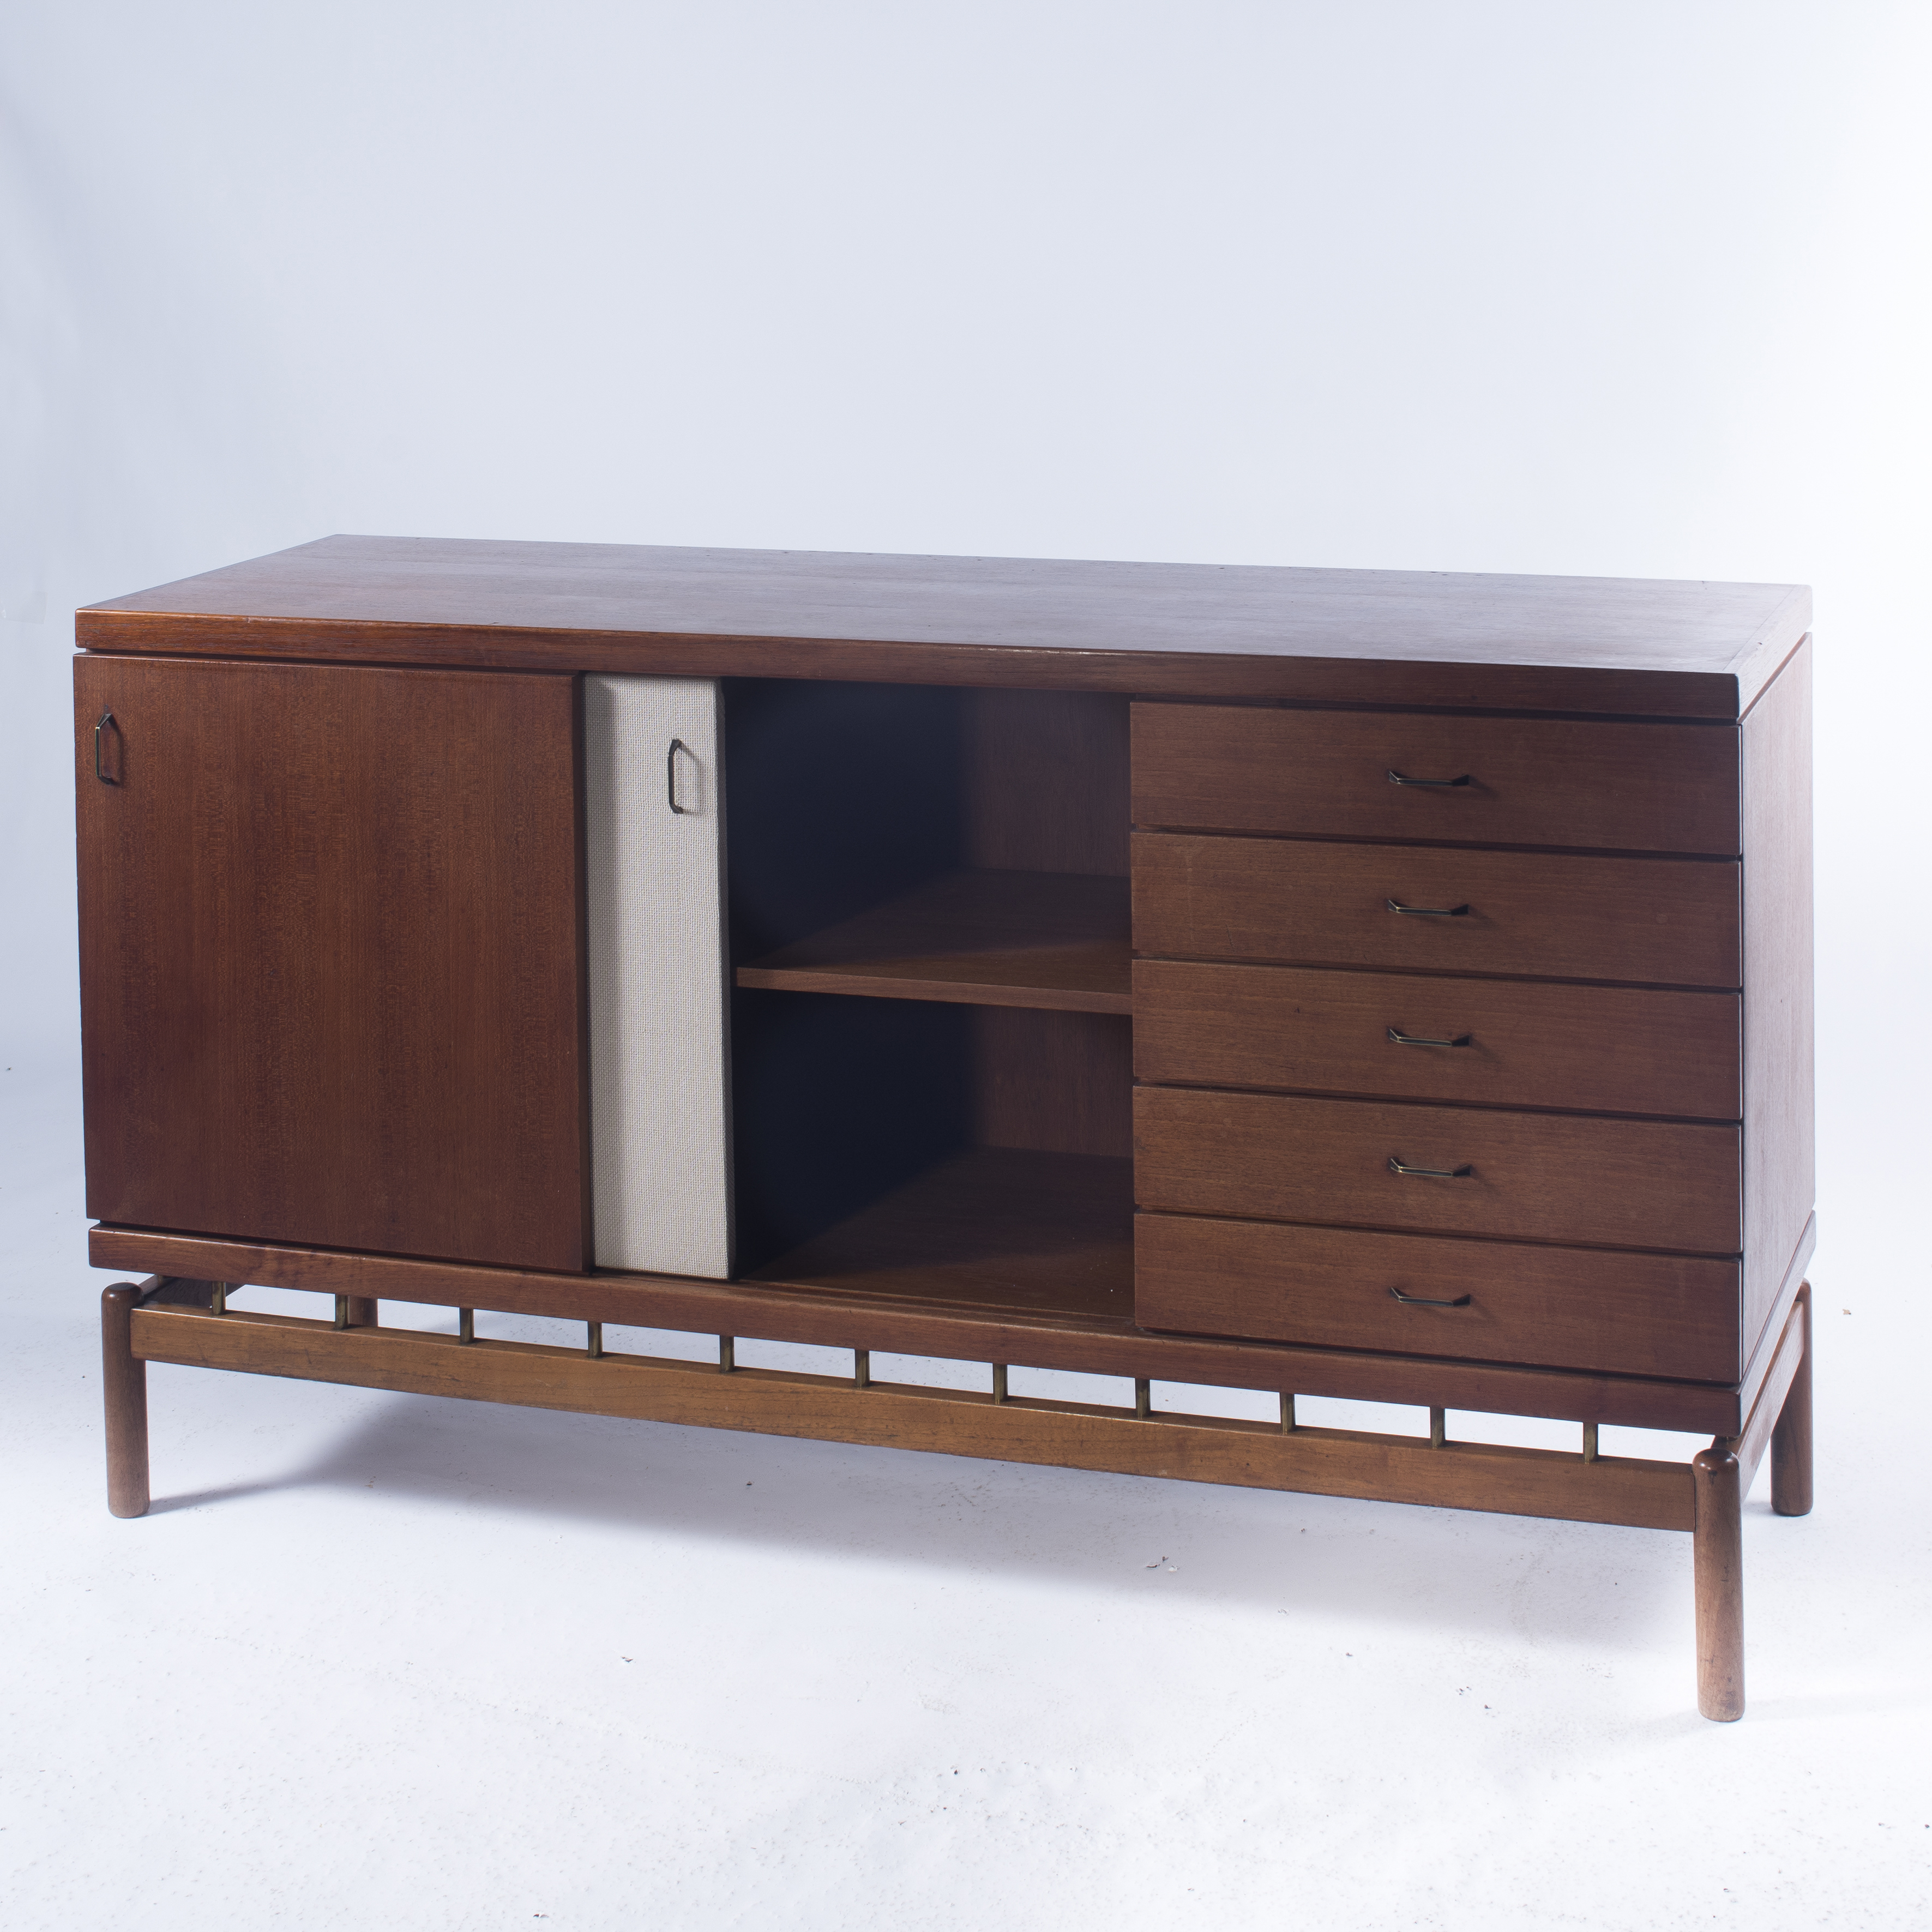 a31-rare-mid-century-modern-sideboard-by-tapiovaara-for-permanente-mobili-95282_2